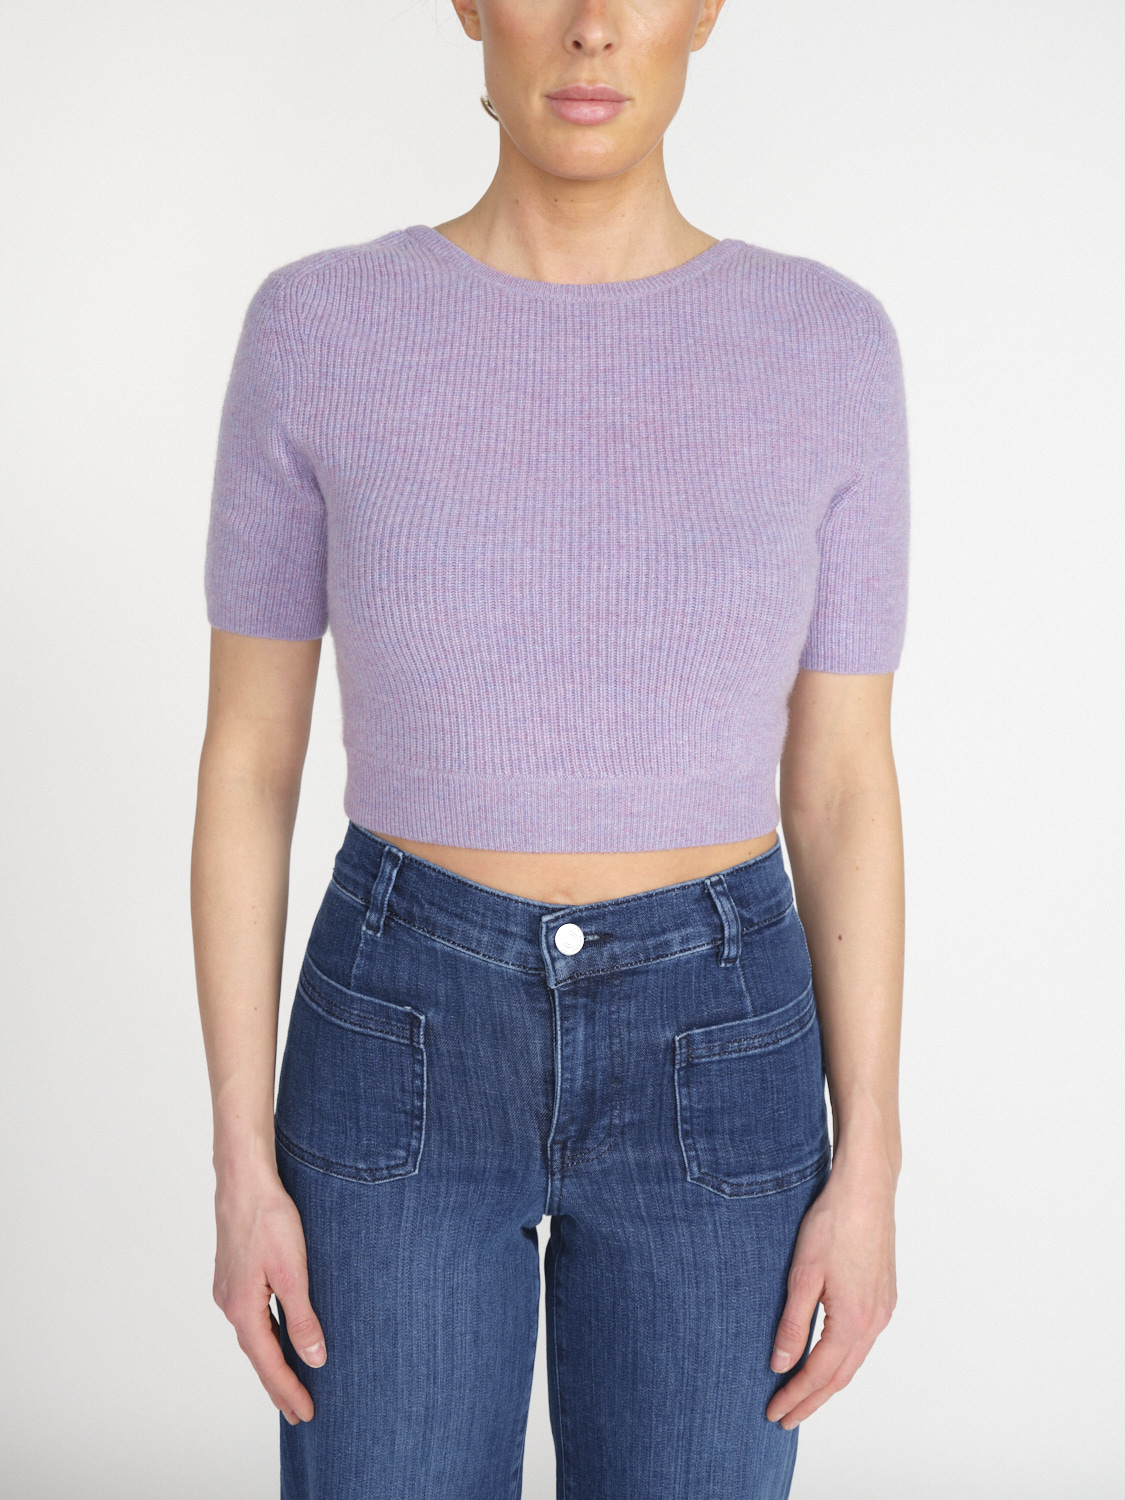 Lisa Yang Josefina - Short-sleeved cashmere sweater with cut-out at the back  lila XS/S